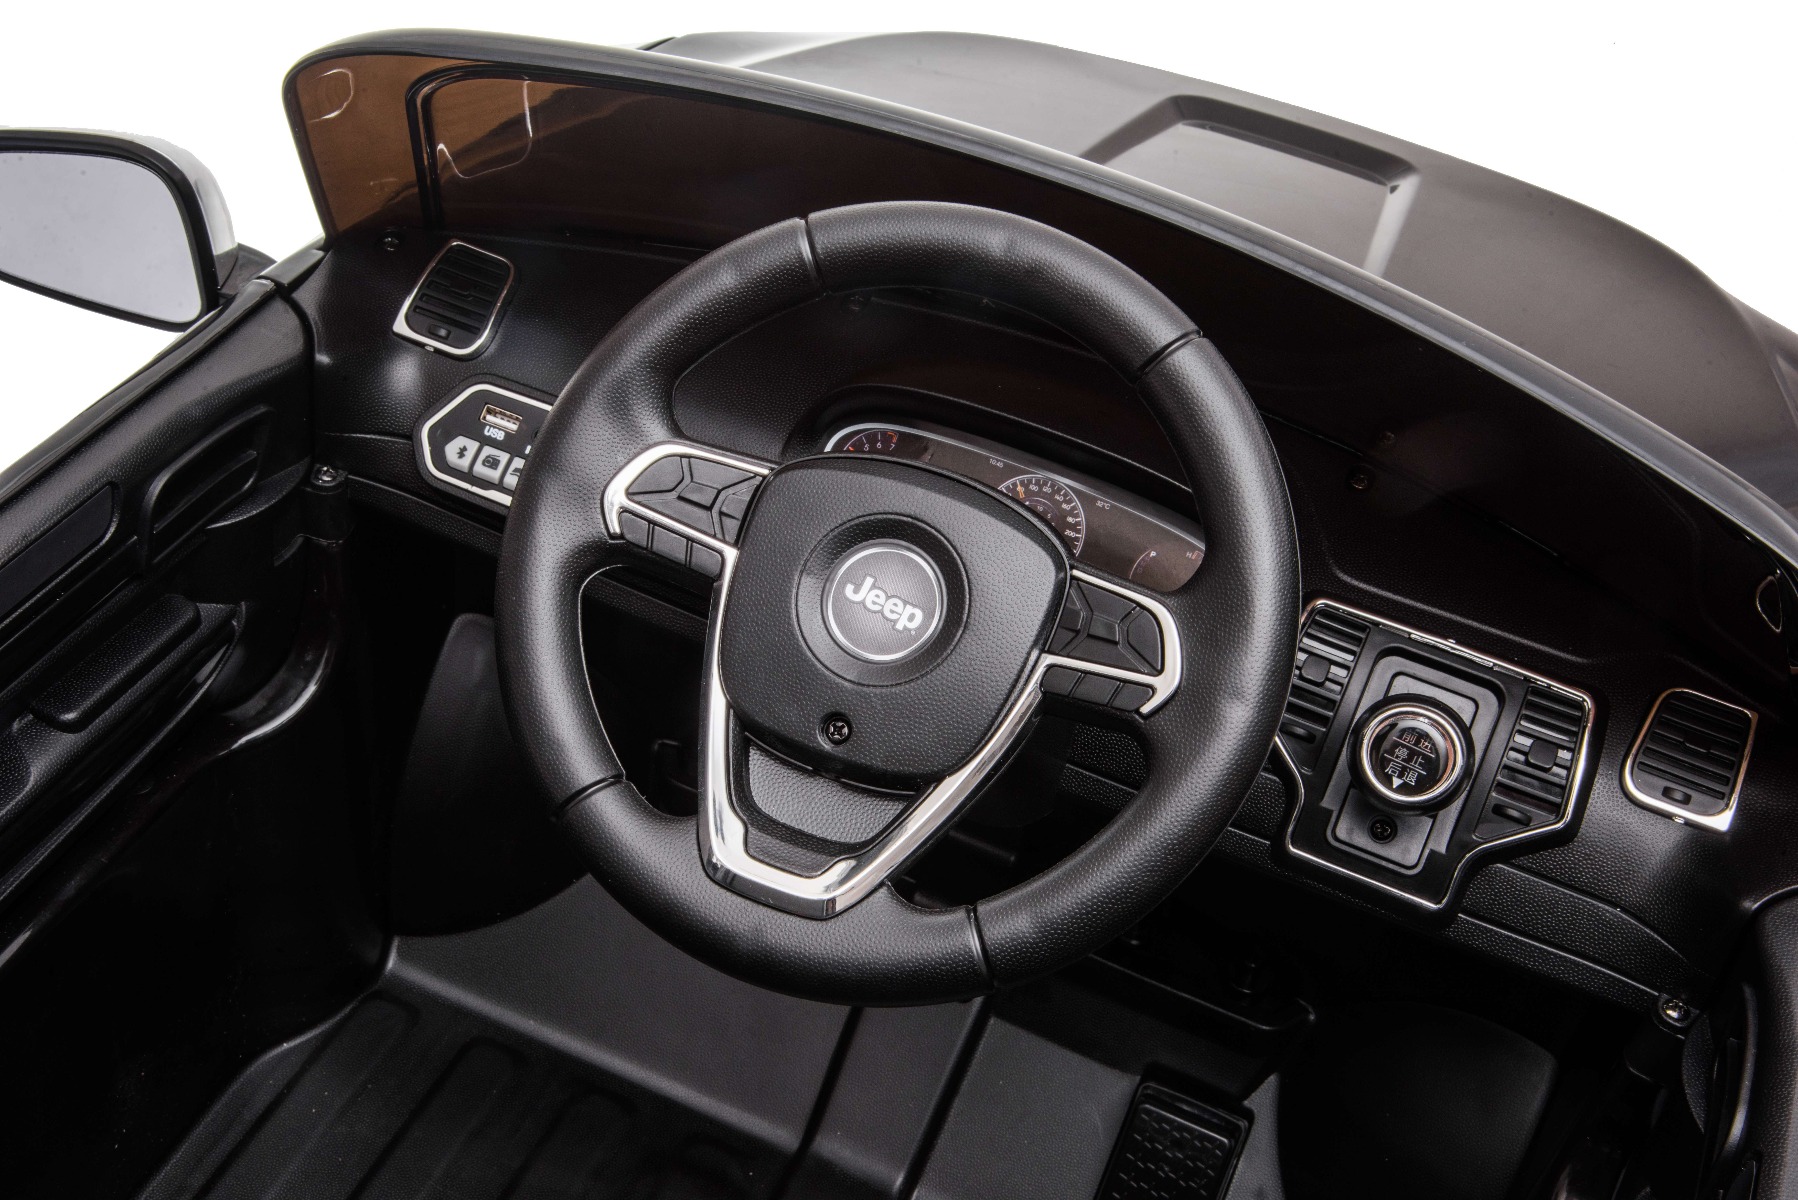 Steering Wheel Buttons